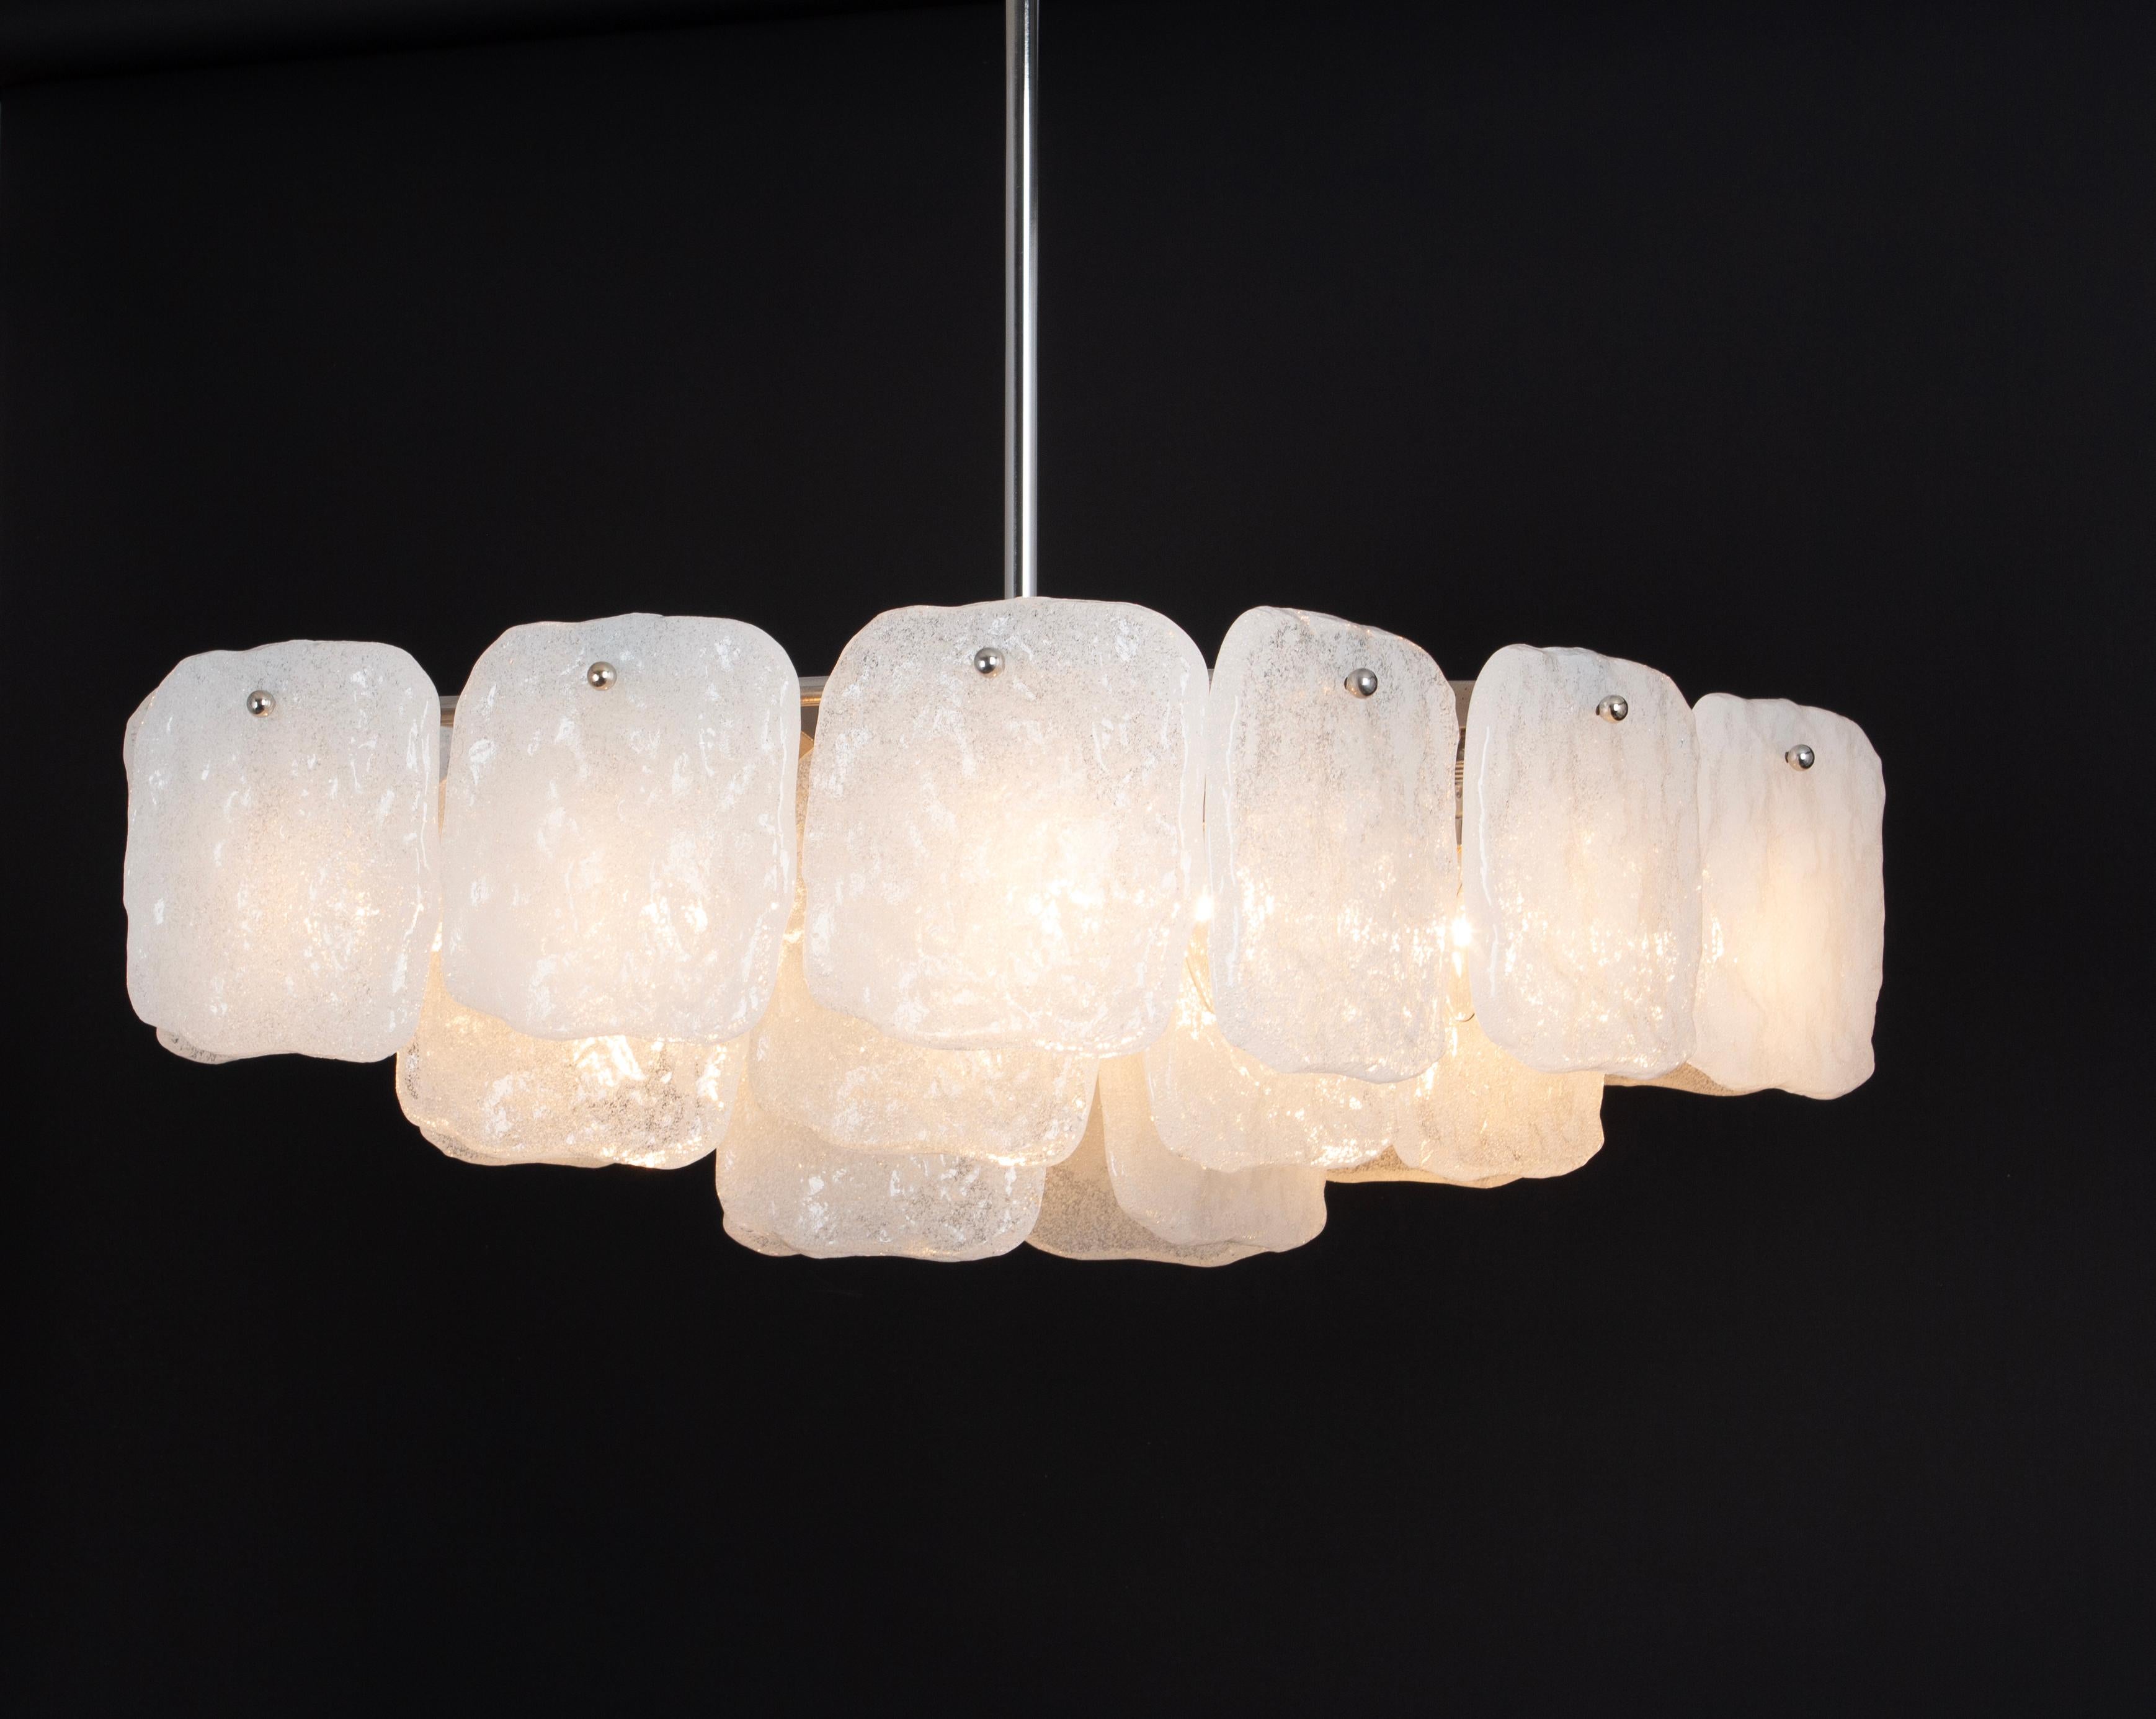 1 of 2 Large Murano Ice Glass Chandelier by Kalmar, Austria, 1960s For Sale 3